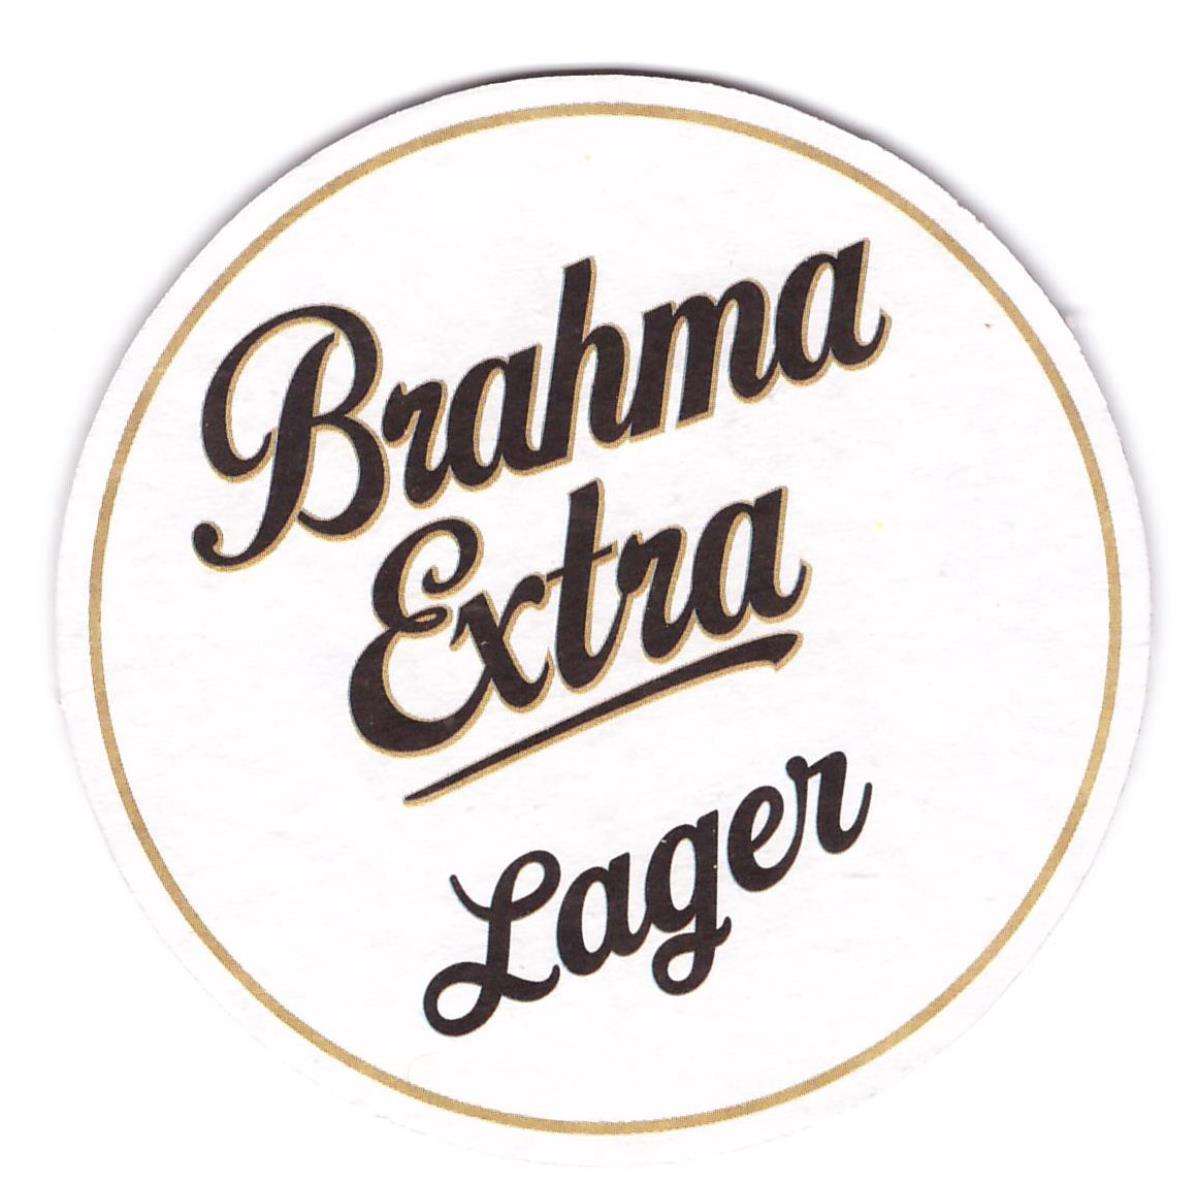 Brhma Extra Lager